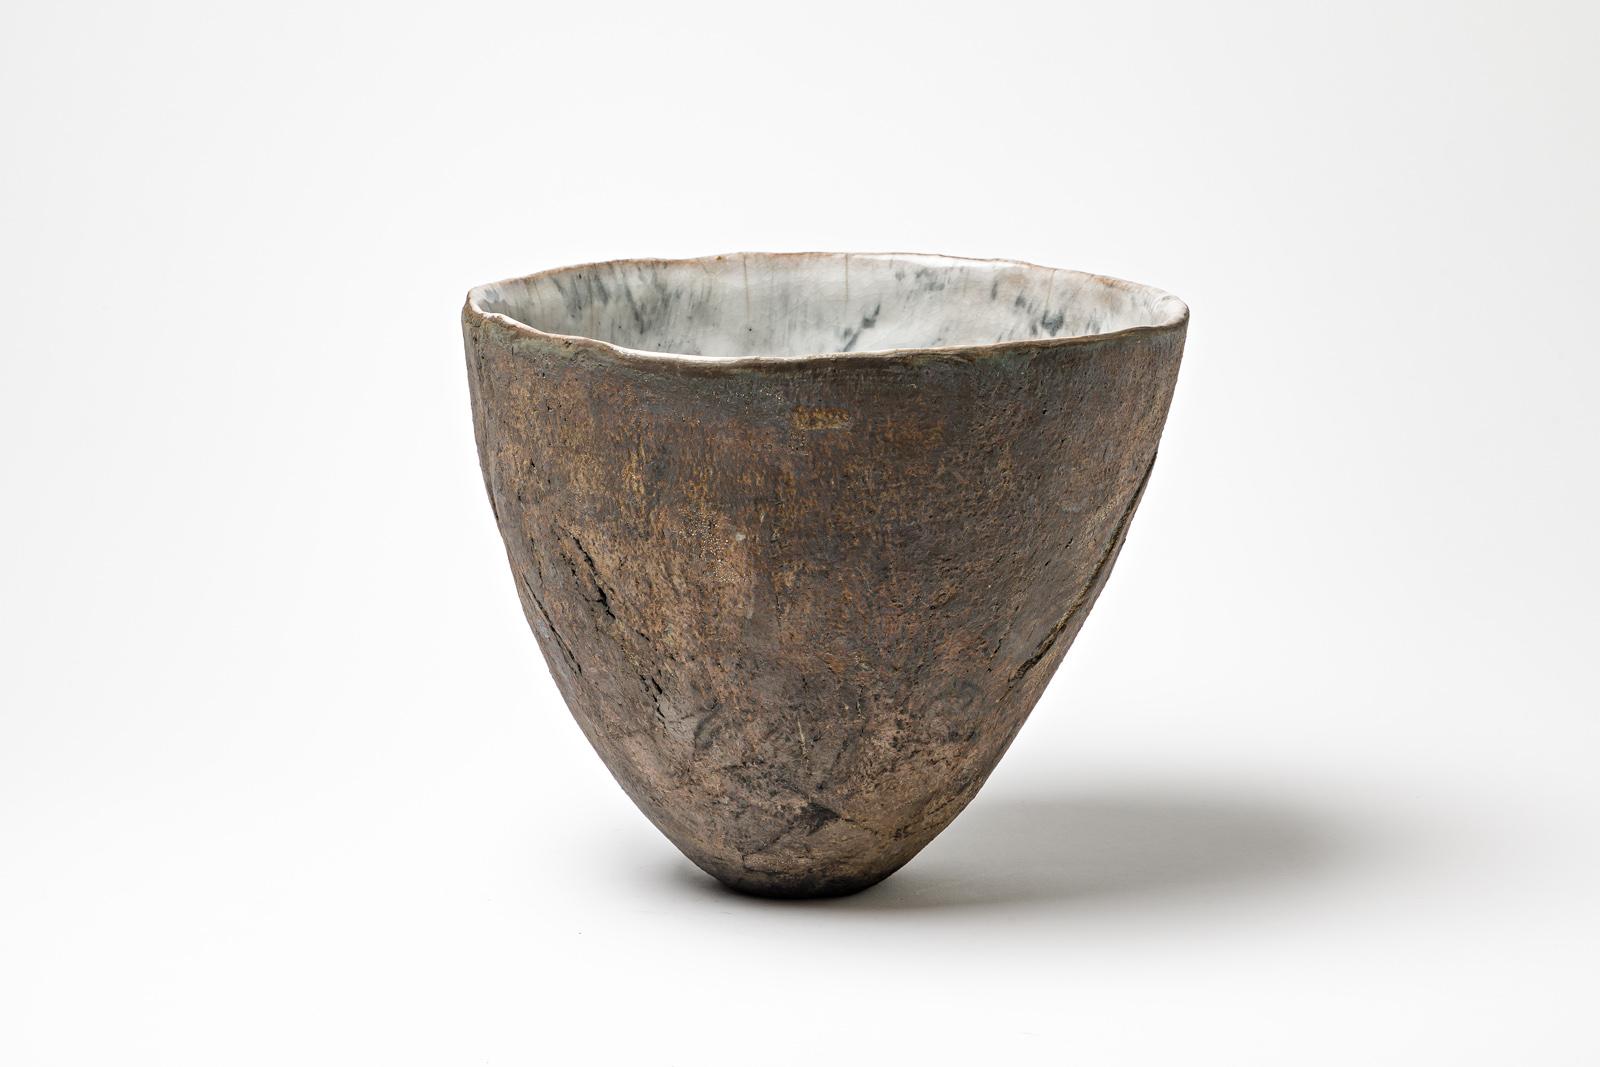 Glazed ceramic bowl with pearly white interior by Gisèle Buthod Garçon. 
Raku fired. Artist monogram and signature under the base. Circa 1980-1990. 
H : 8.3’ x 9.8’ inches.